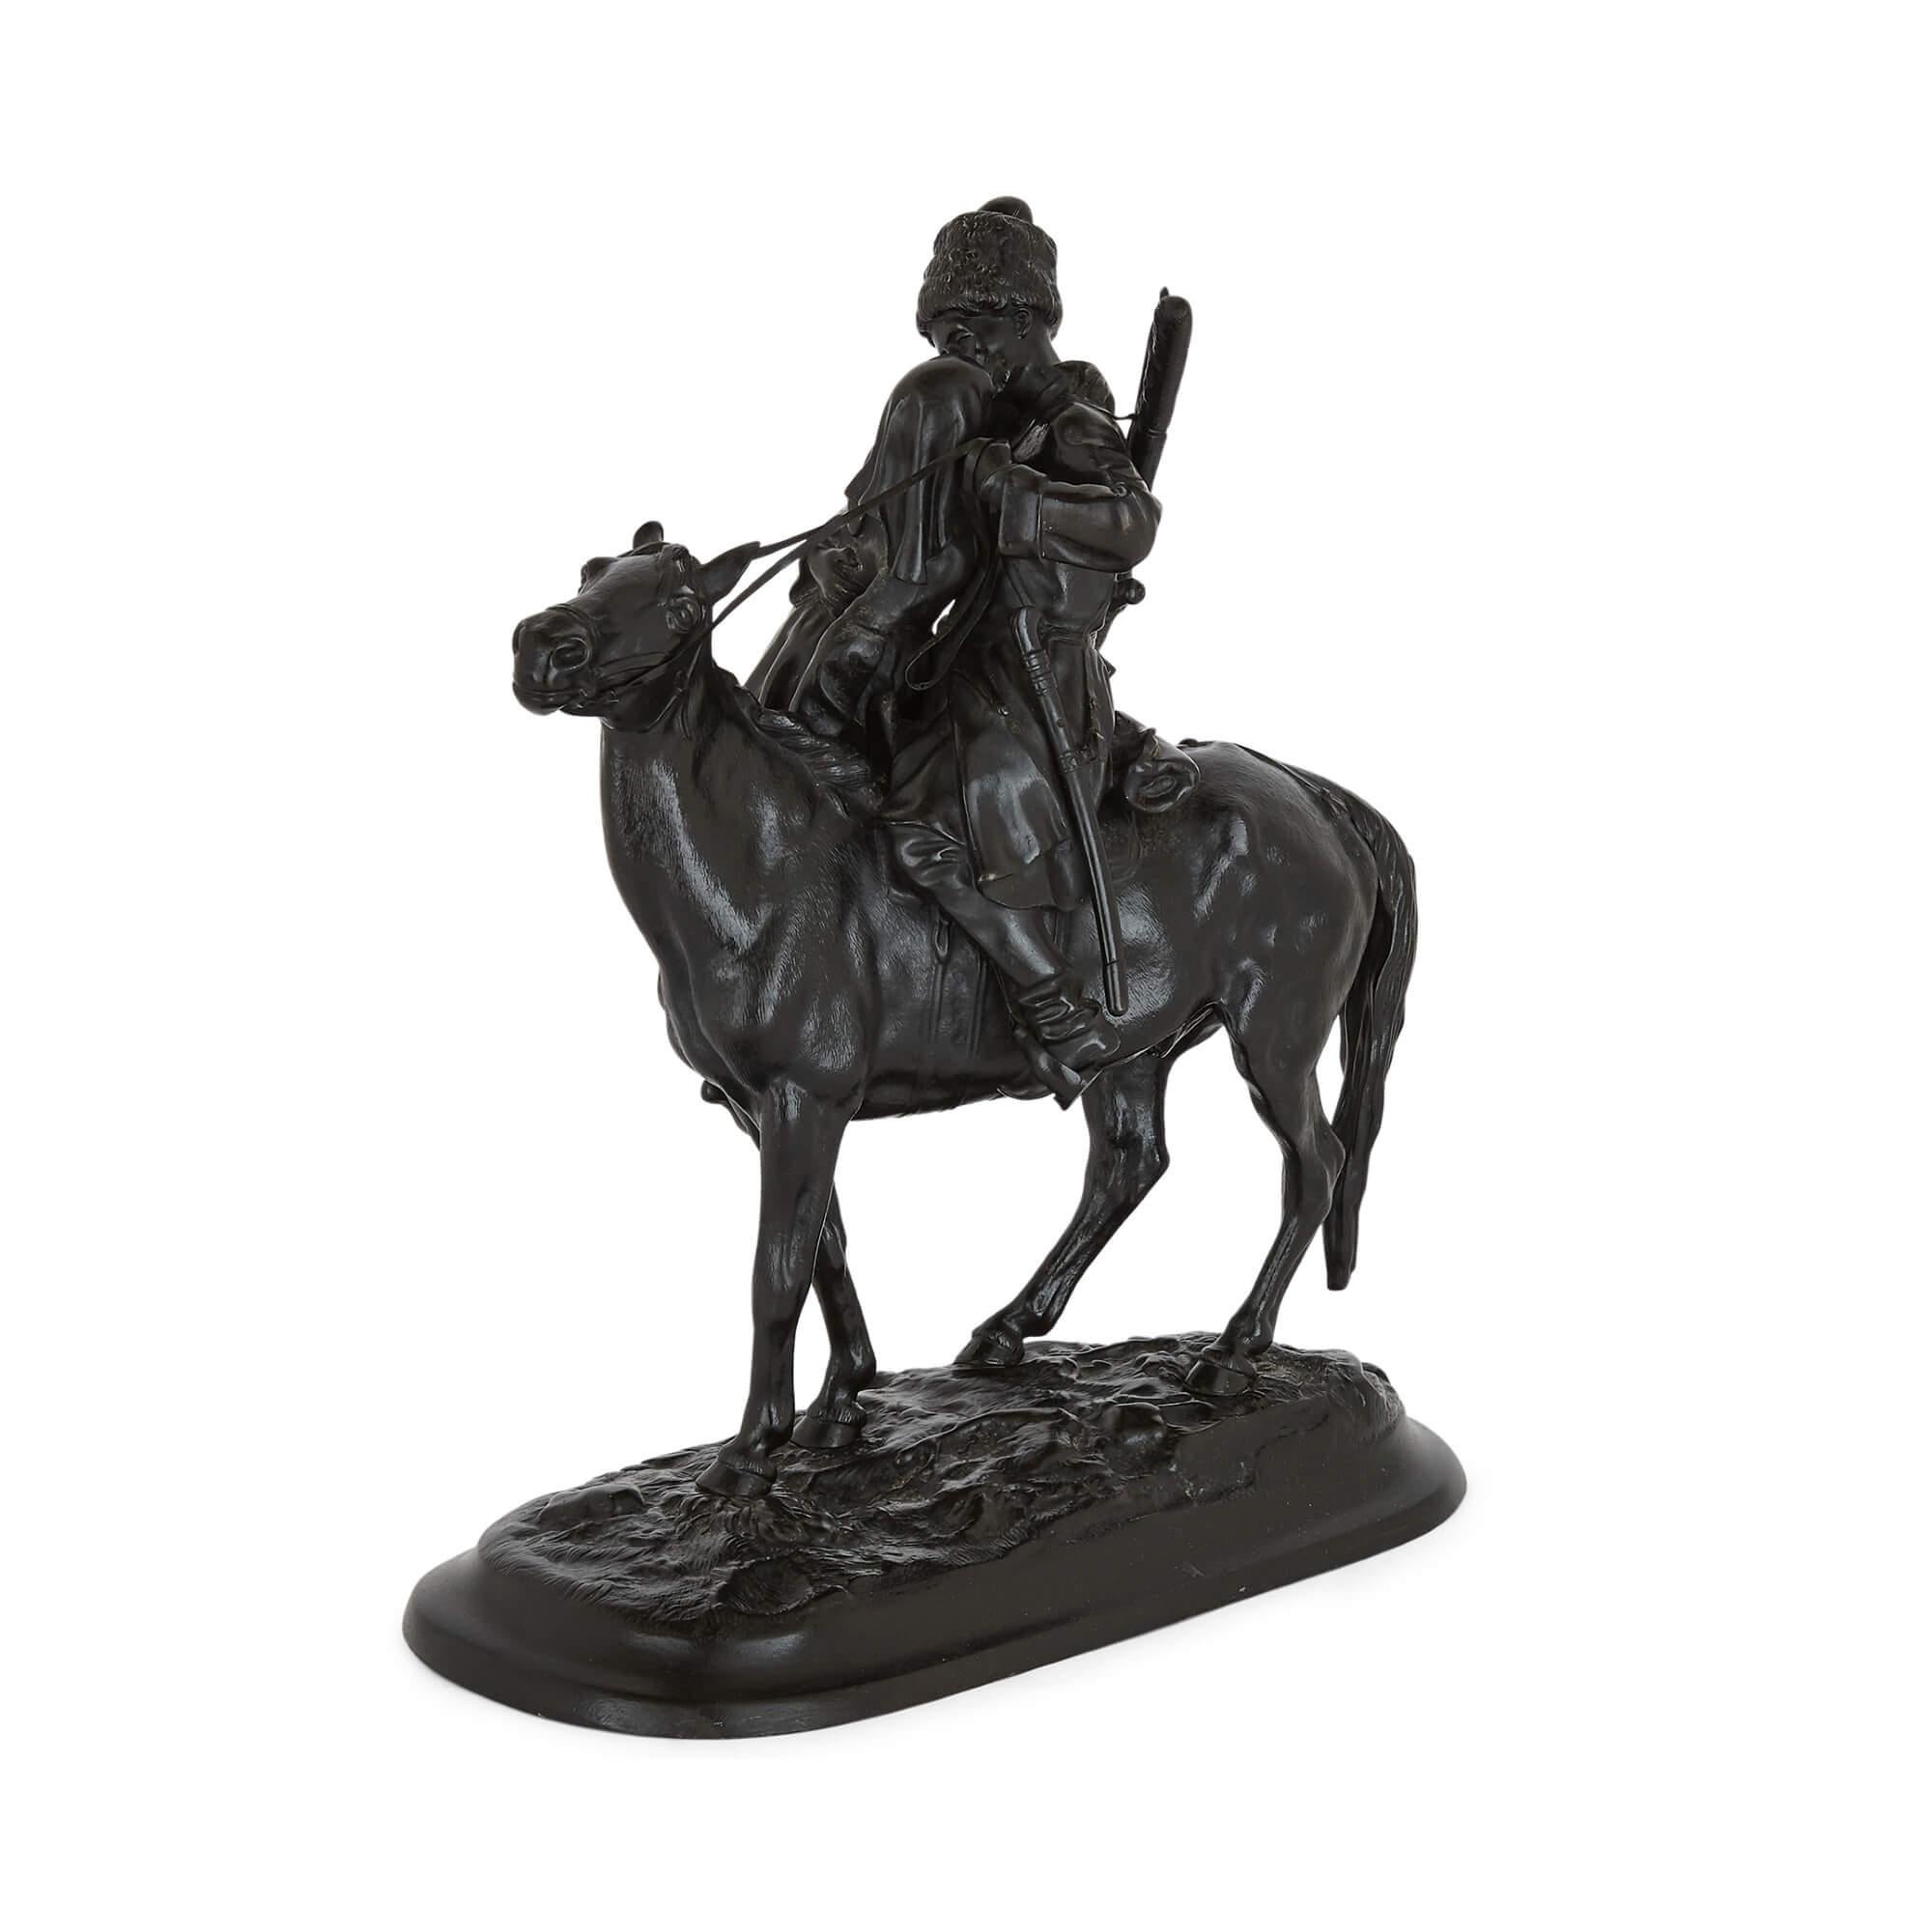 Russian iron sculpture of a Cossack horseman
Russian, 1912
Height 39cm, width 35.5cm, depth 17.5cm

This expressive patinated cast iron sculpture depicts a Cossack soldier on horseback. The soldier embraces his lover, who leaps from the ground into